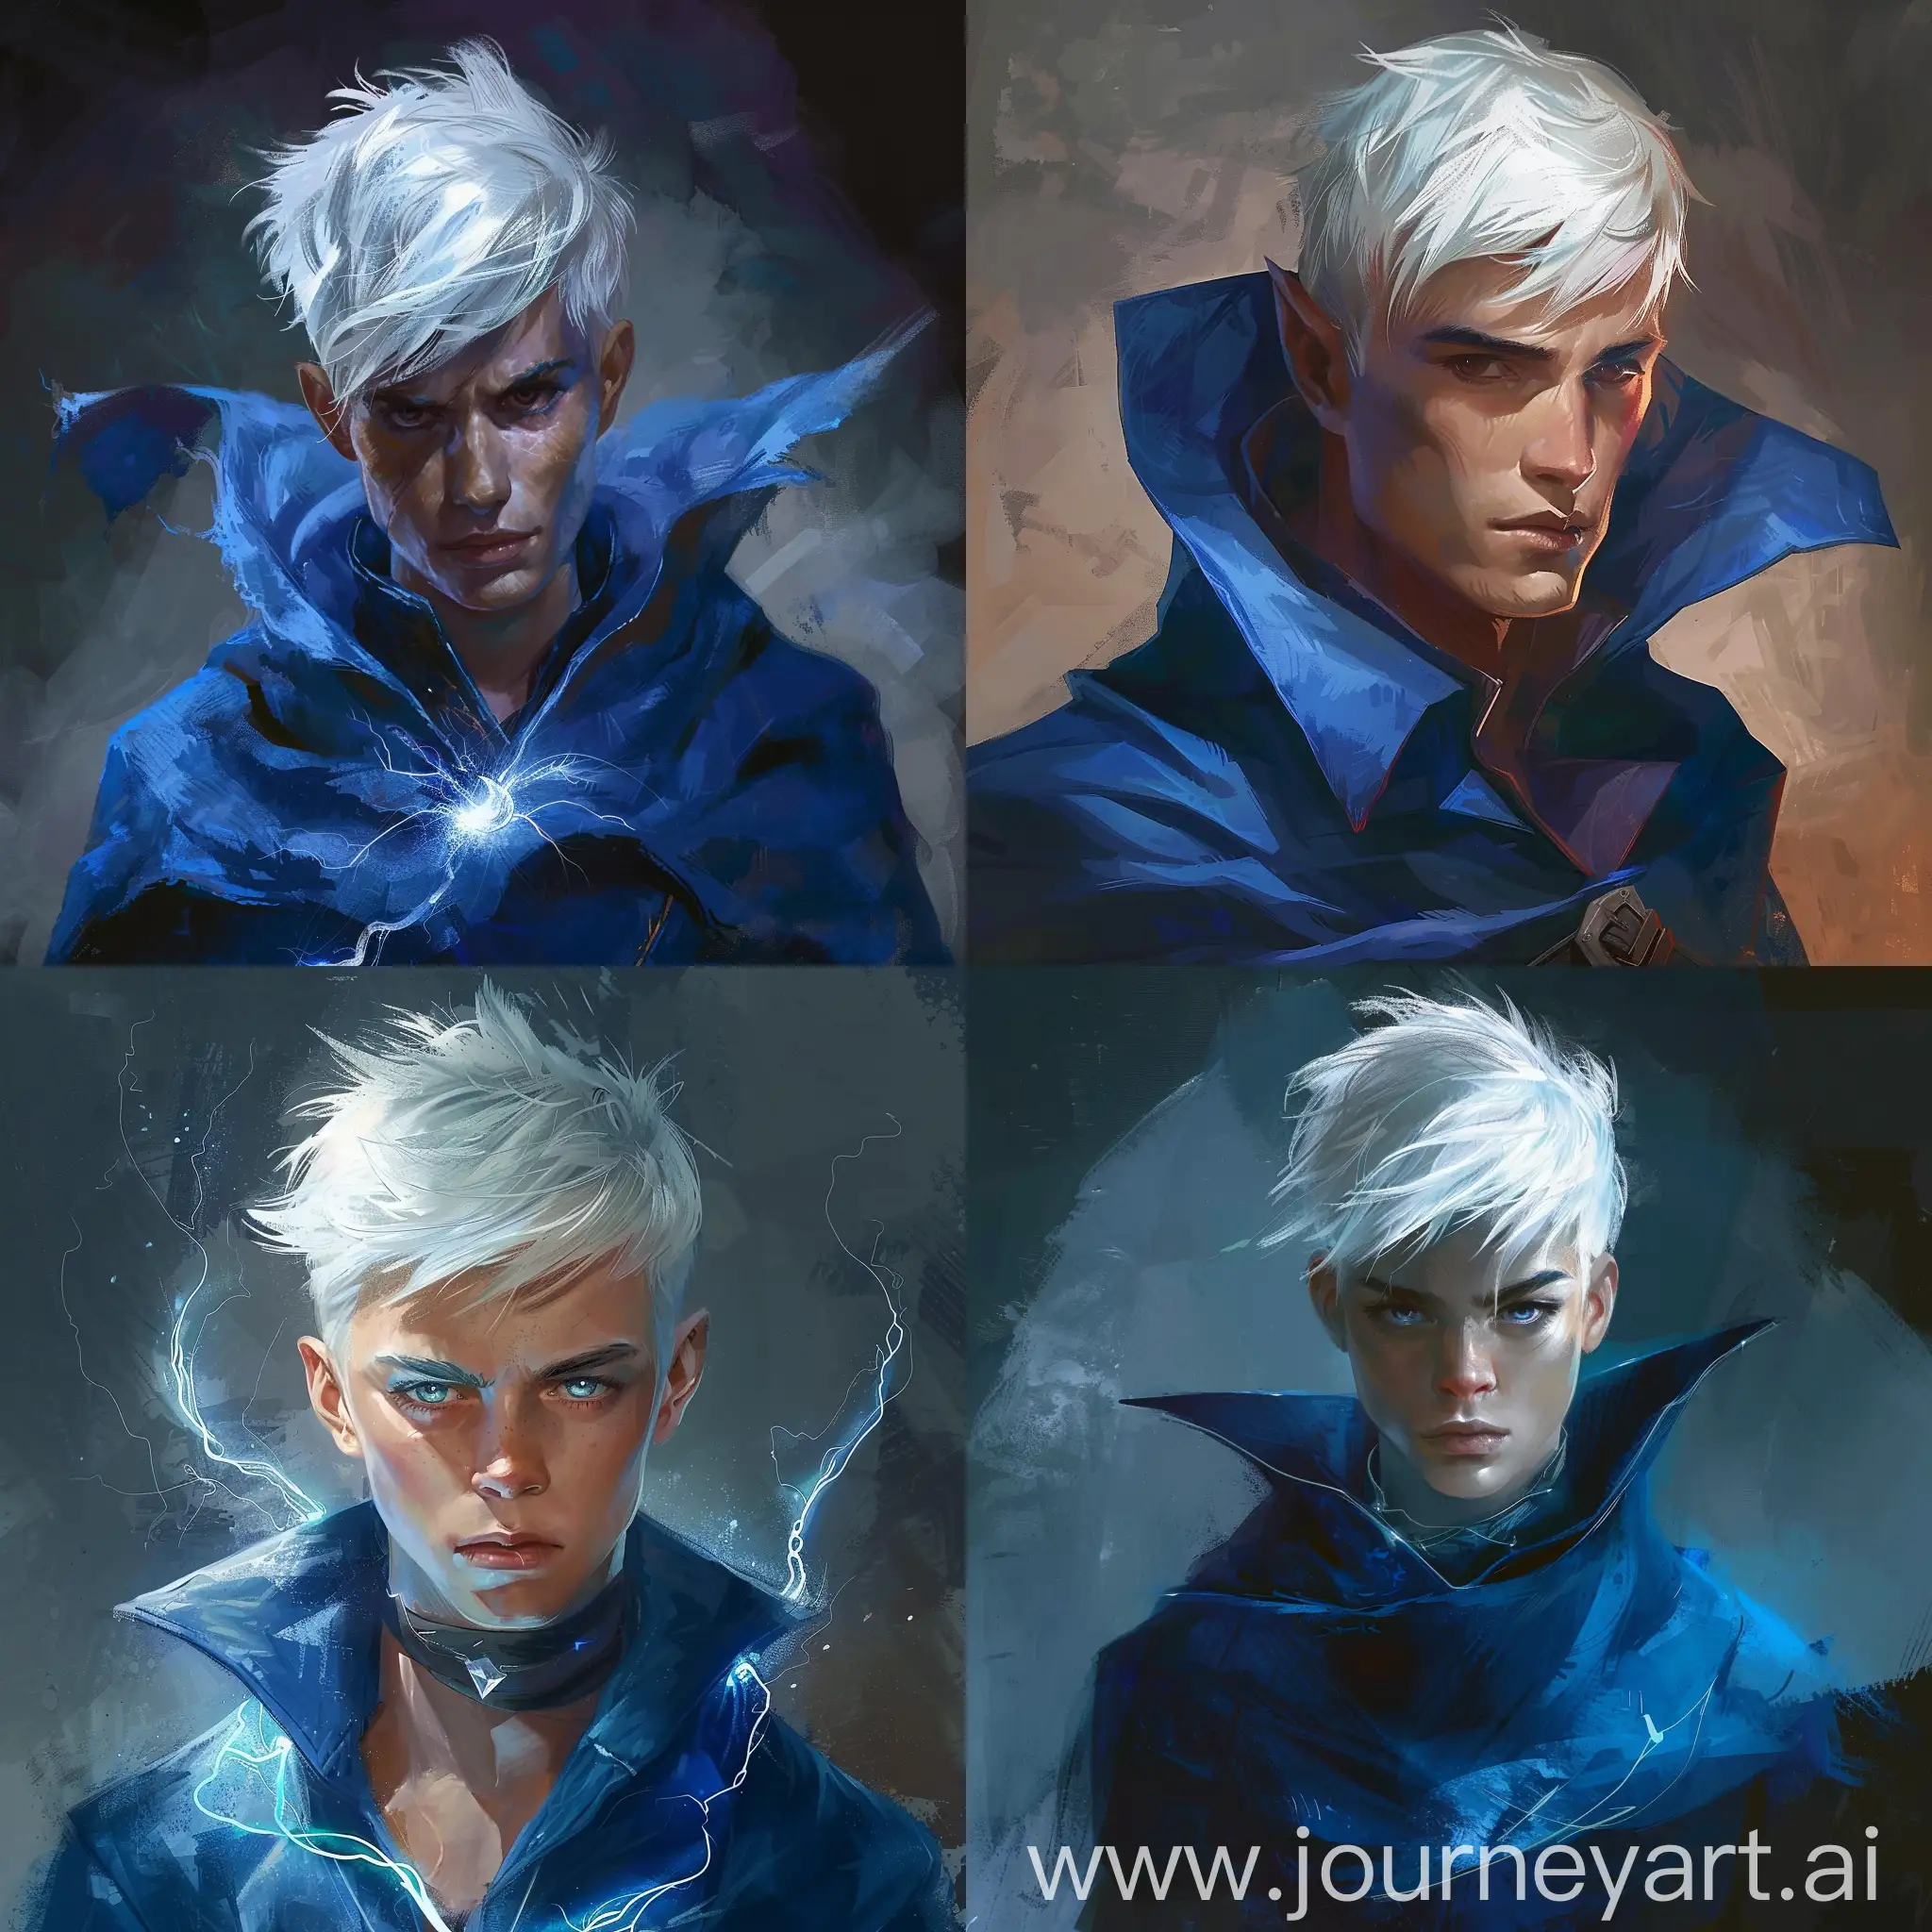 Mystical-WhiteHaired-Sorcerer-in-Blue-Robe-with-Intense-Gaze